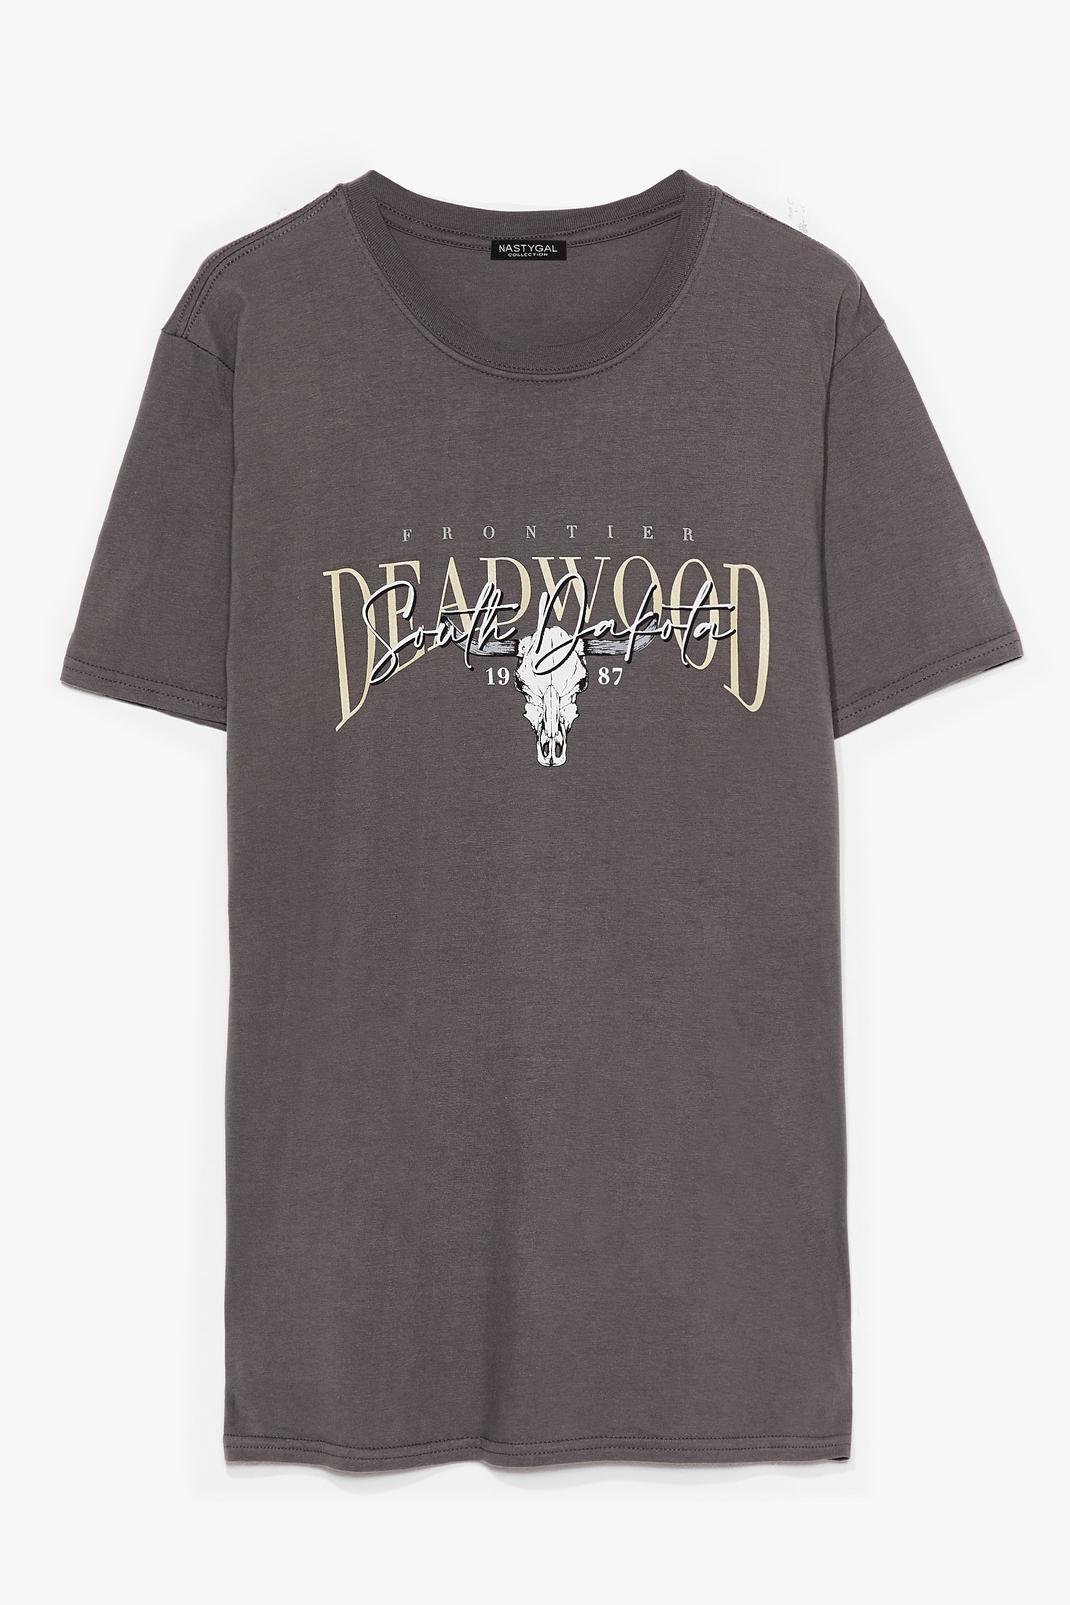 Charcoal Deadwood South Graphic Tee image number 1